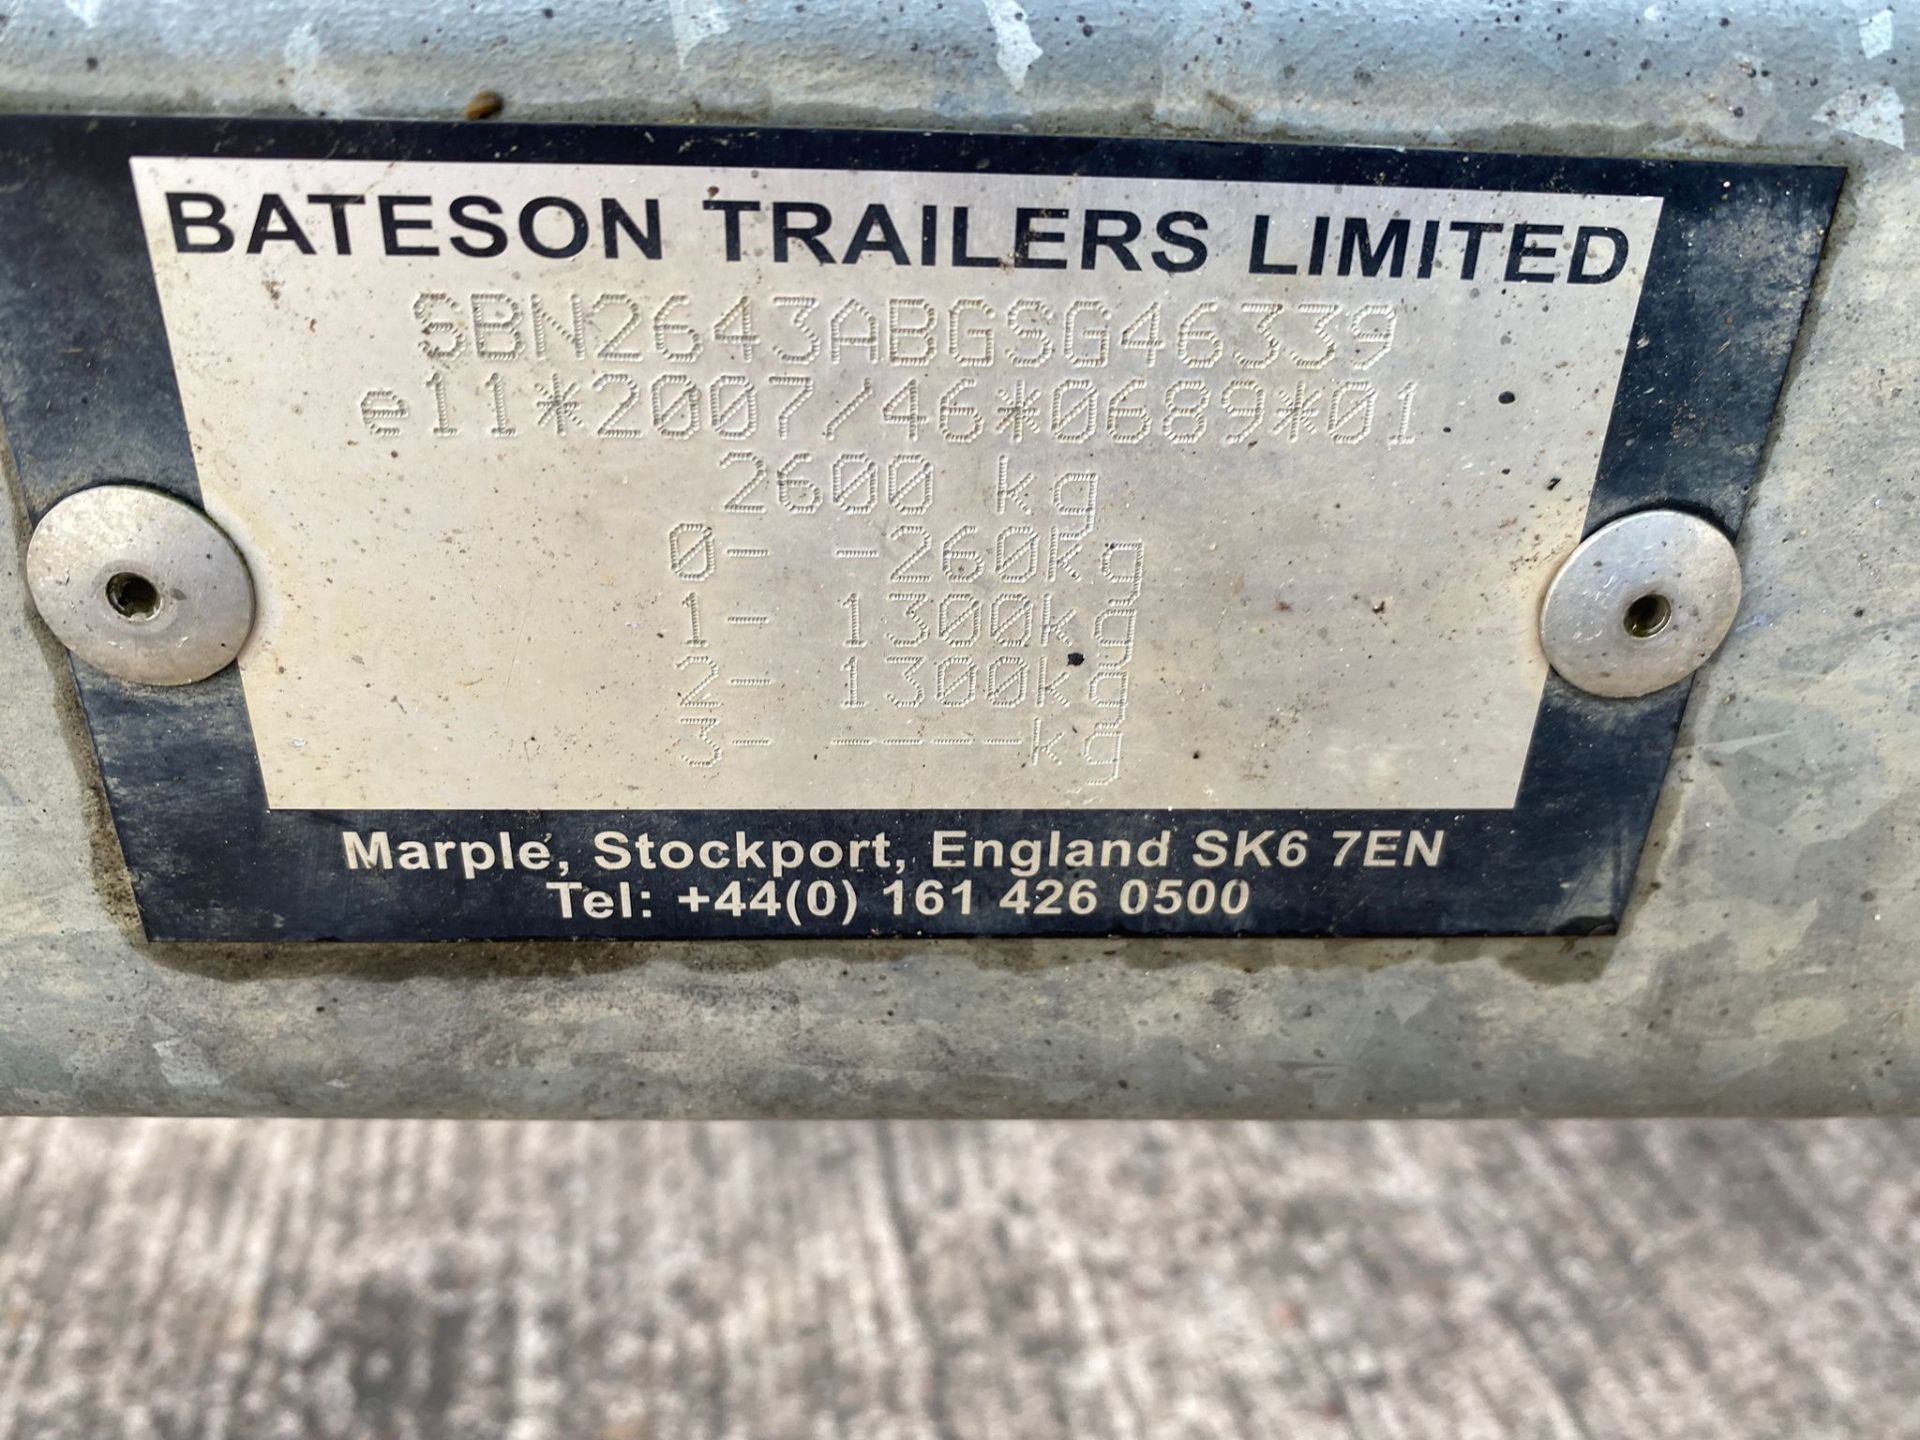 2007 BATESON TRAILER - IN VERY GOOD CONDITION WITH RAMPS, BRAKES ALL WORK, LIGHTS ALL WORK - Bild 3 aus 11